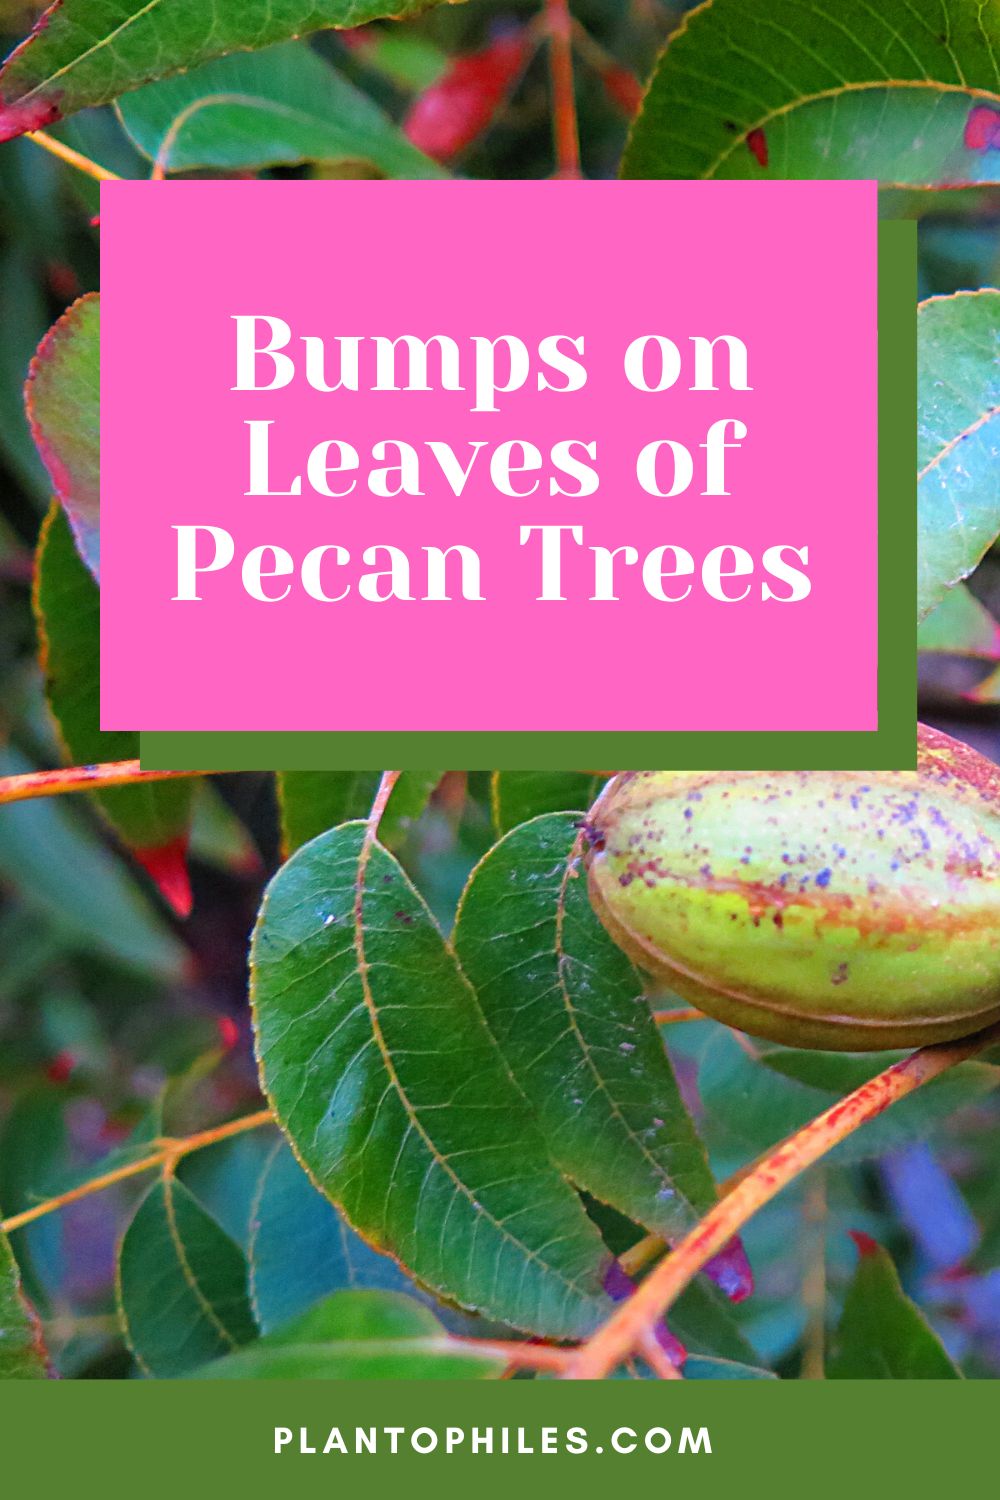 Bumps on Leaves of Pecan Tree